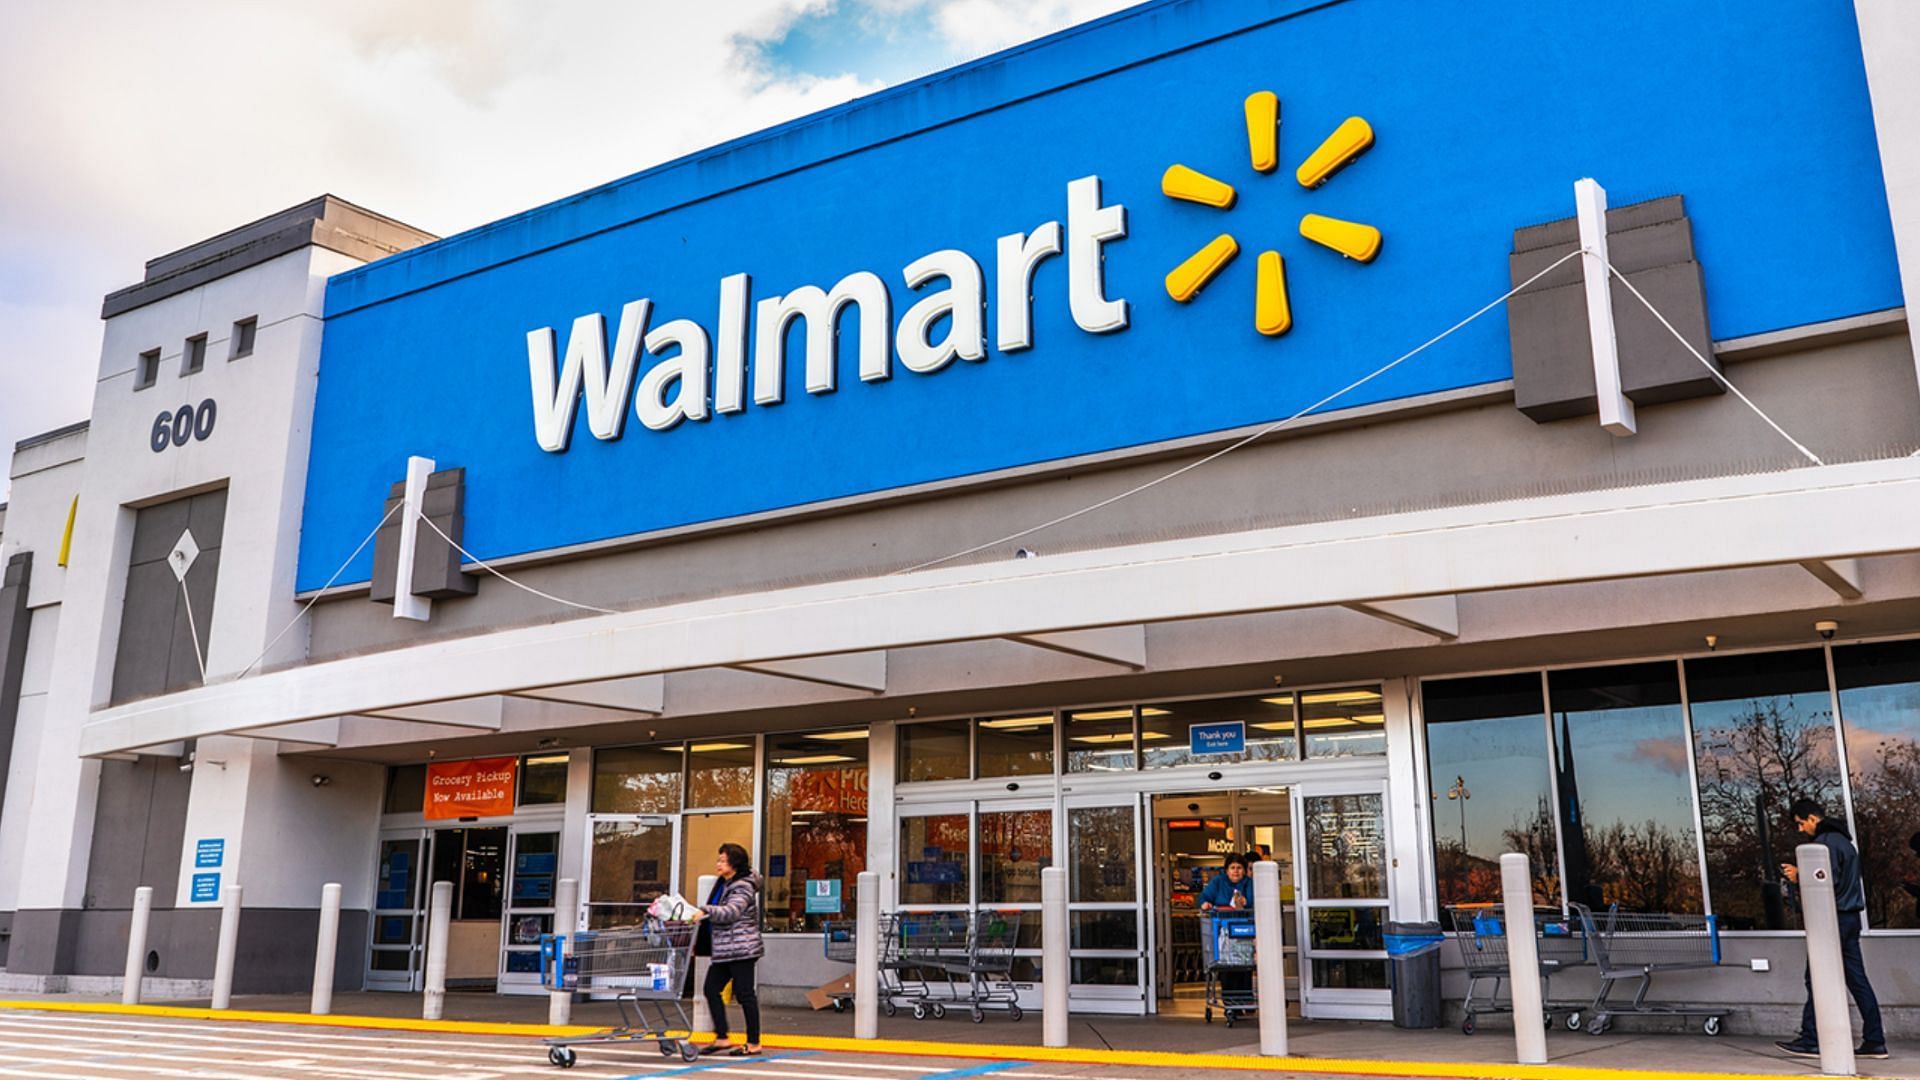 Walmart employees will be able to transfer to nearby stores following the Chicago closures (Image via Sundry Photography/Getty Images)